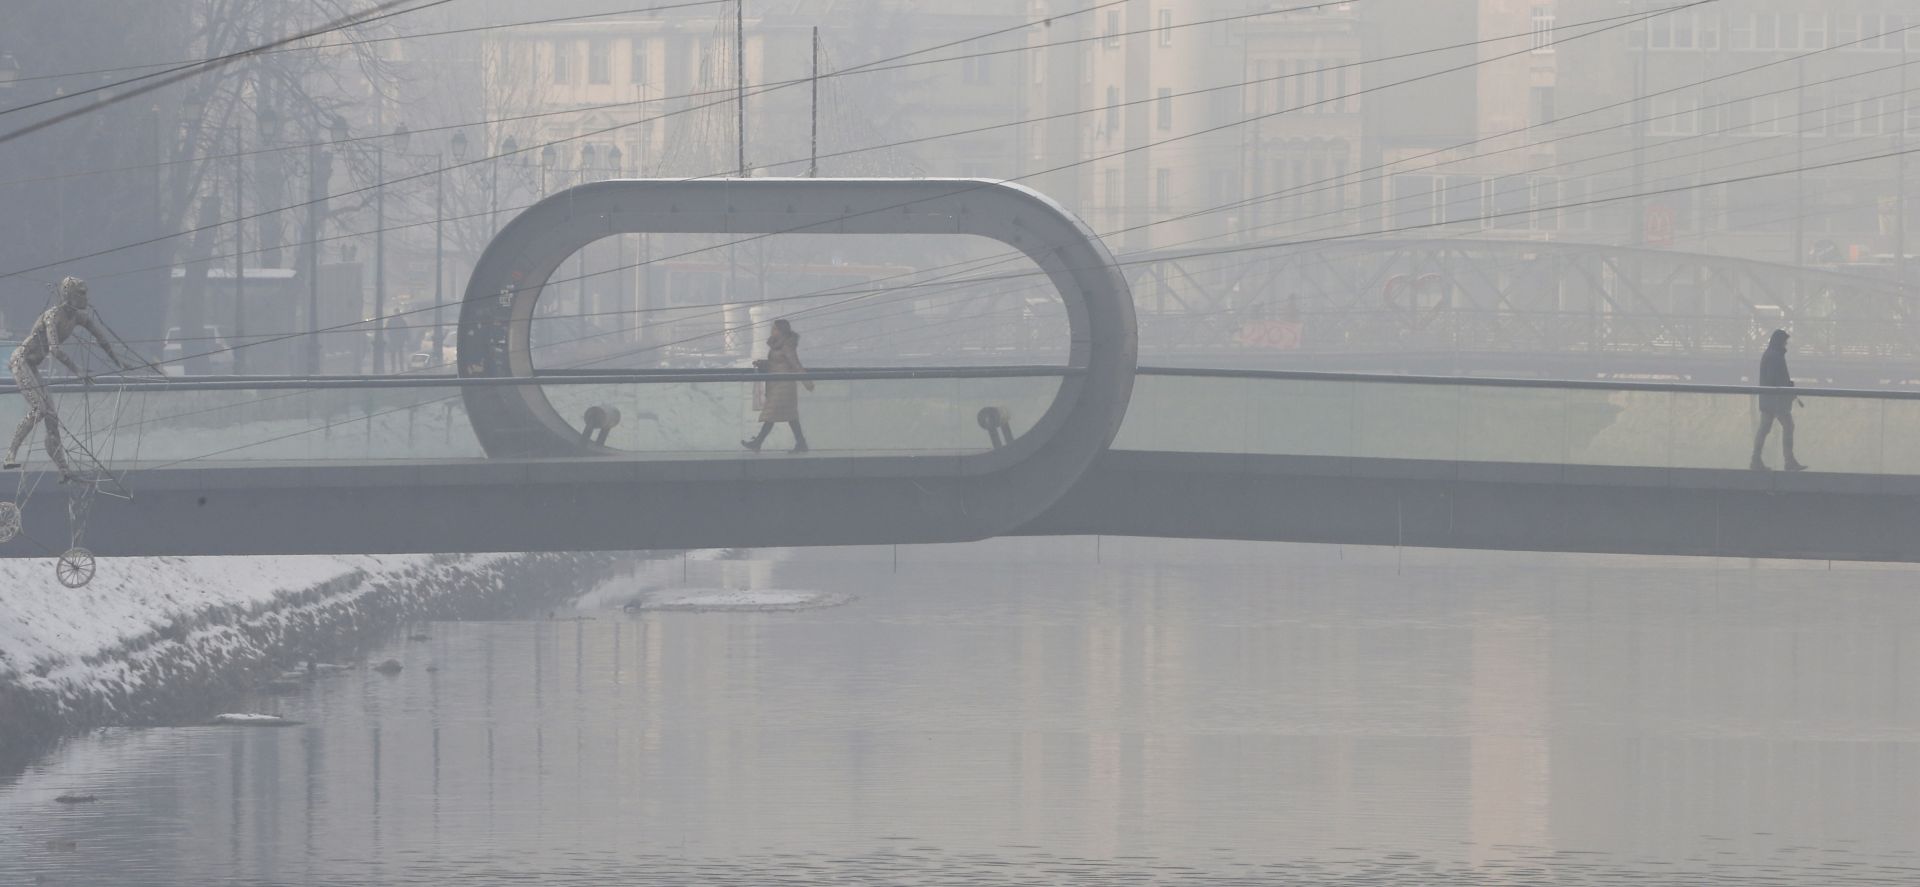 epa08116705 A general view show people crossing a bridge under a heavy fog in the city of Sarajevo, Bosnia and Herzegovina, 10 January 2020. According to reports, residents were recommended to reduce traffic on the roads. With 400 AQI (air quality index), Sarajevo today is one of the most polluted cities in the world.  EPA/FEHIM DEMIR